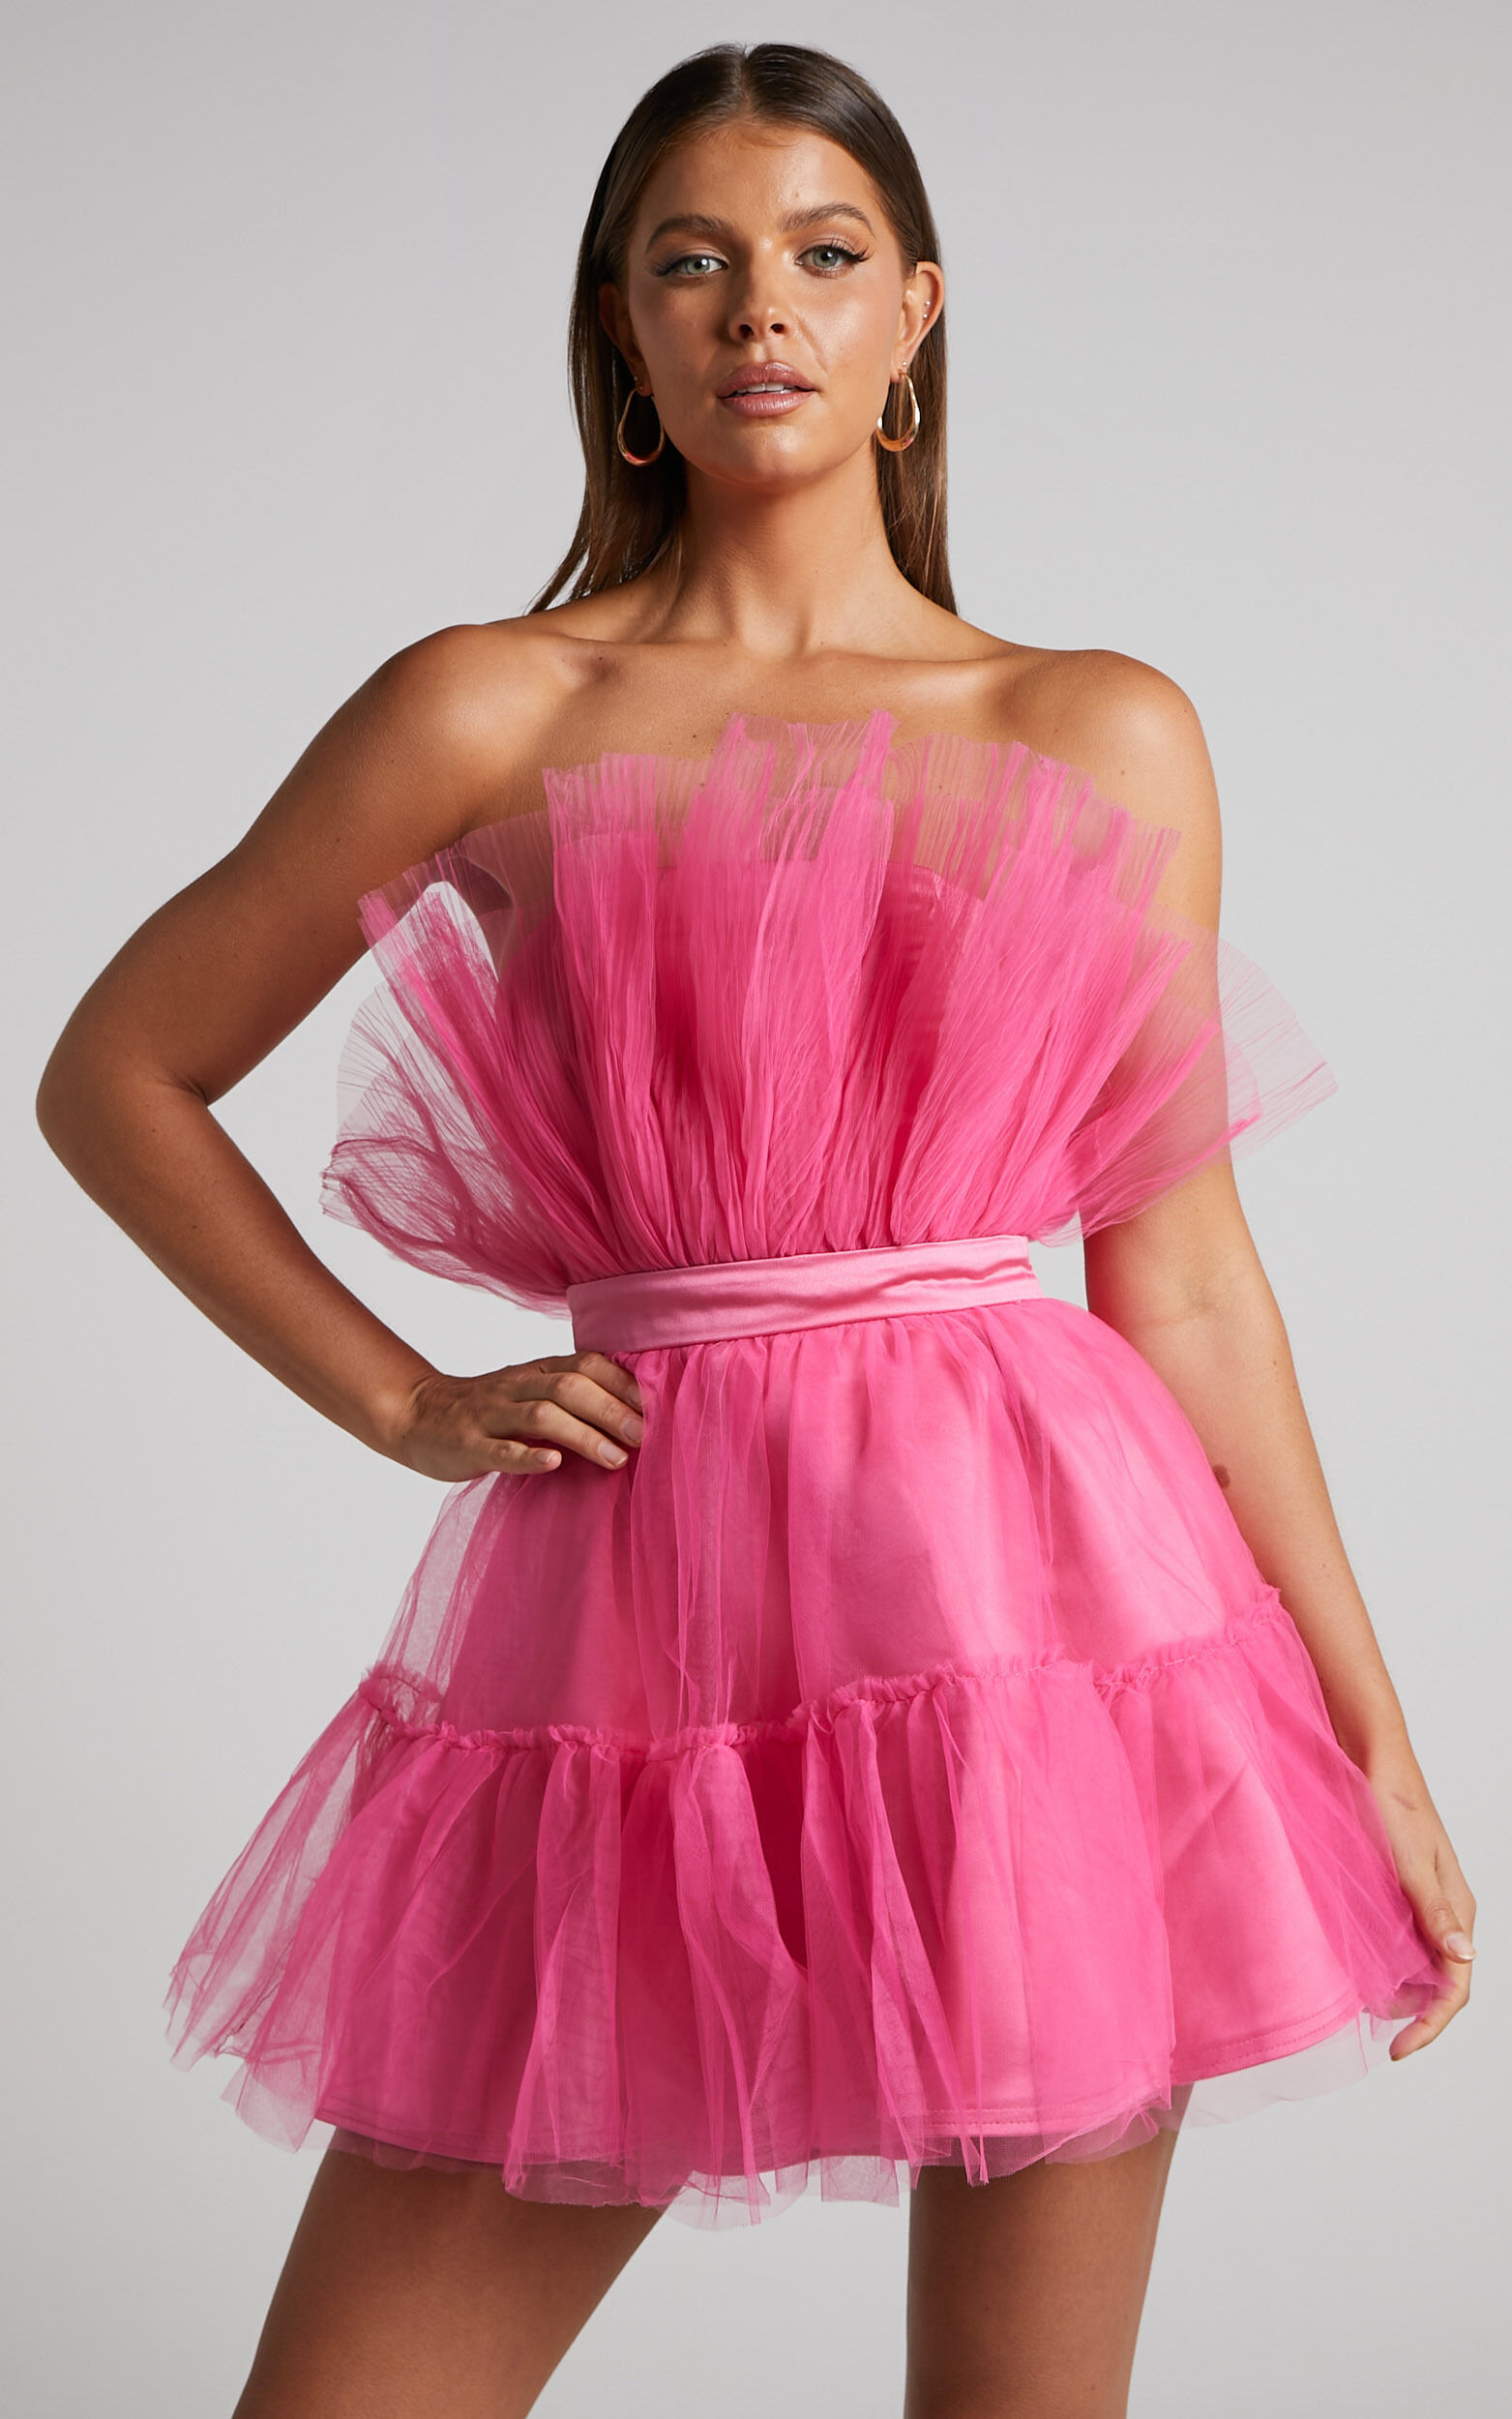 Amalya Mini Dress - Tiered Tulle Fit and Flare Dress in Hot Pink - 04, PNK2